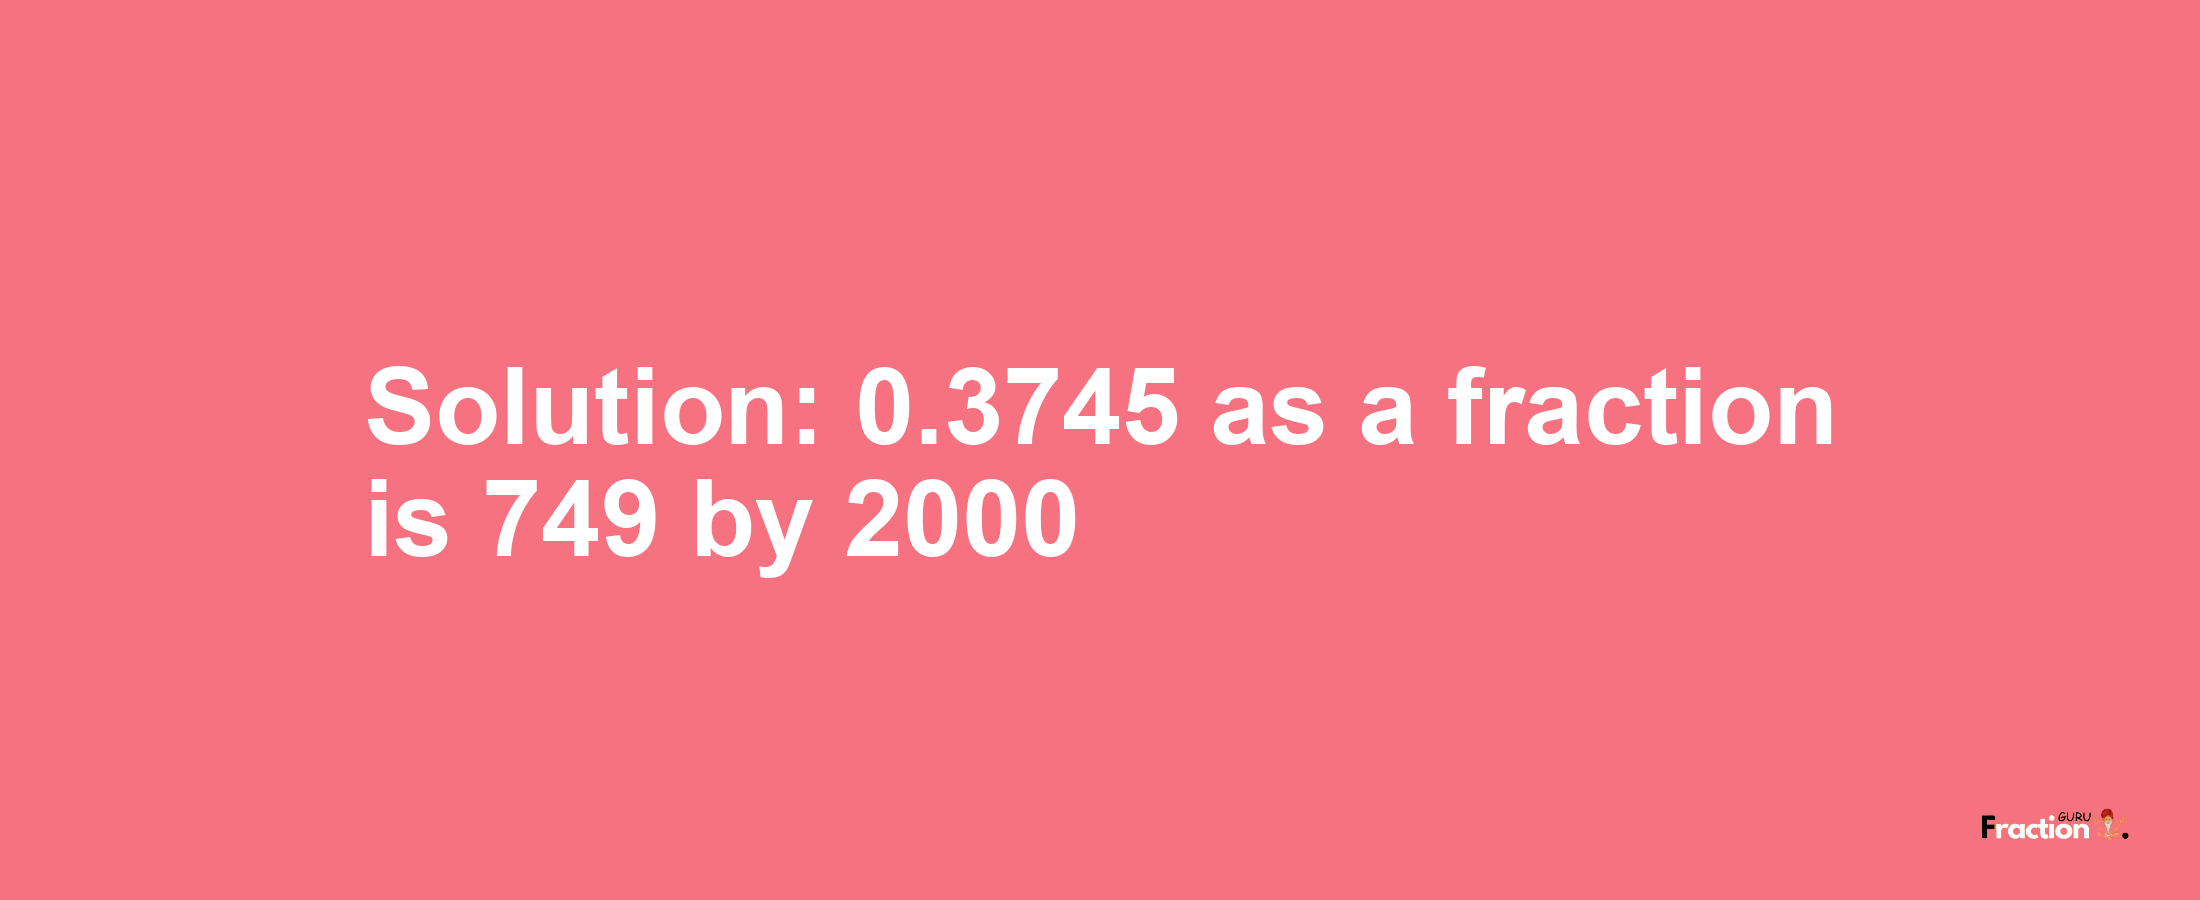 Solution:0.3745 as a fraction is 749/2000